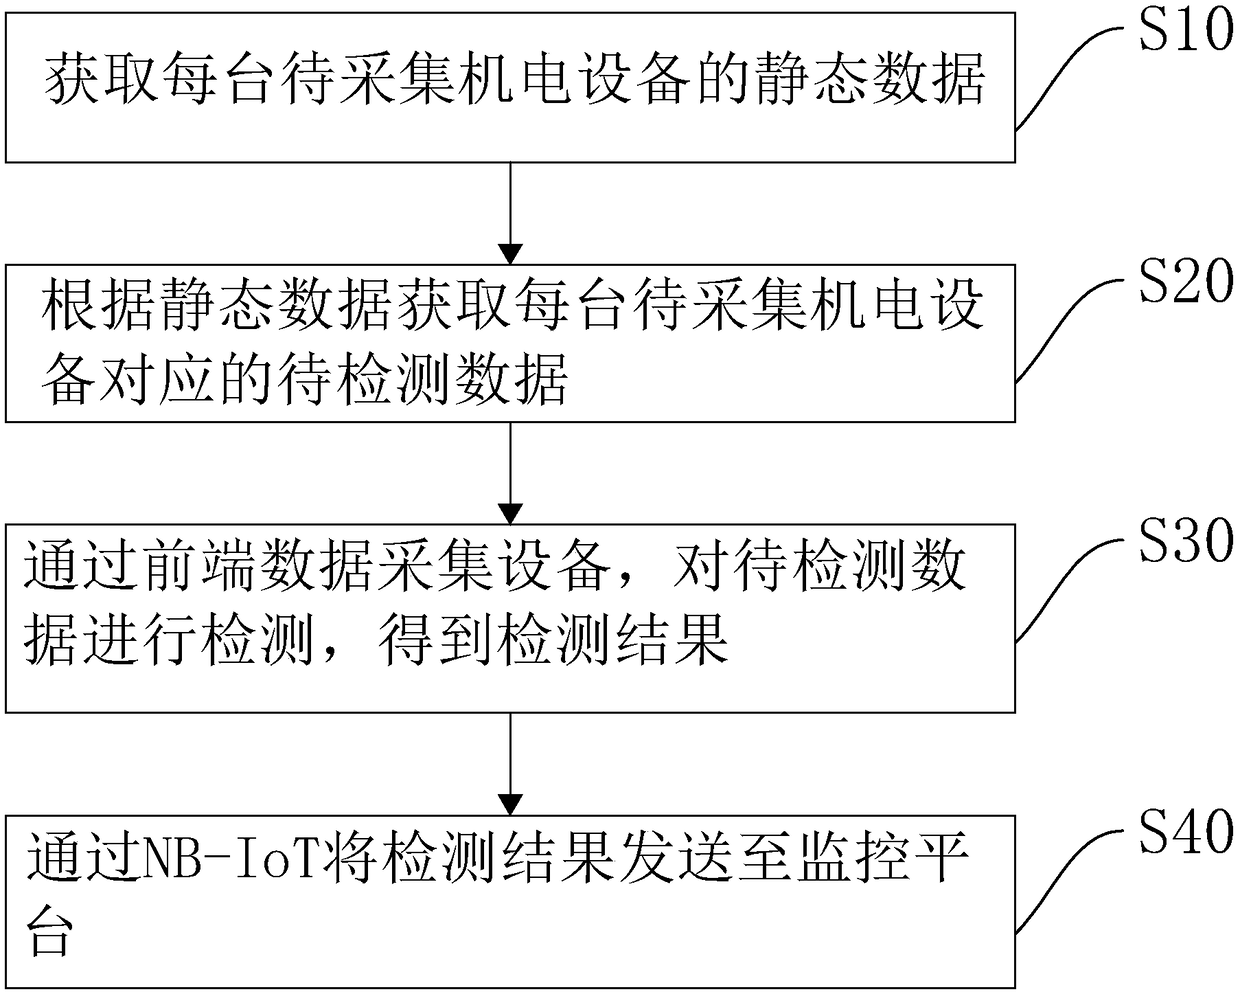 Narrowband technology-based electromechanical equipment operation and maintenance data collection method and system